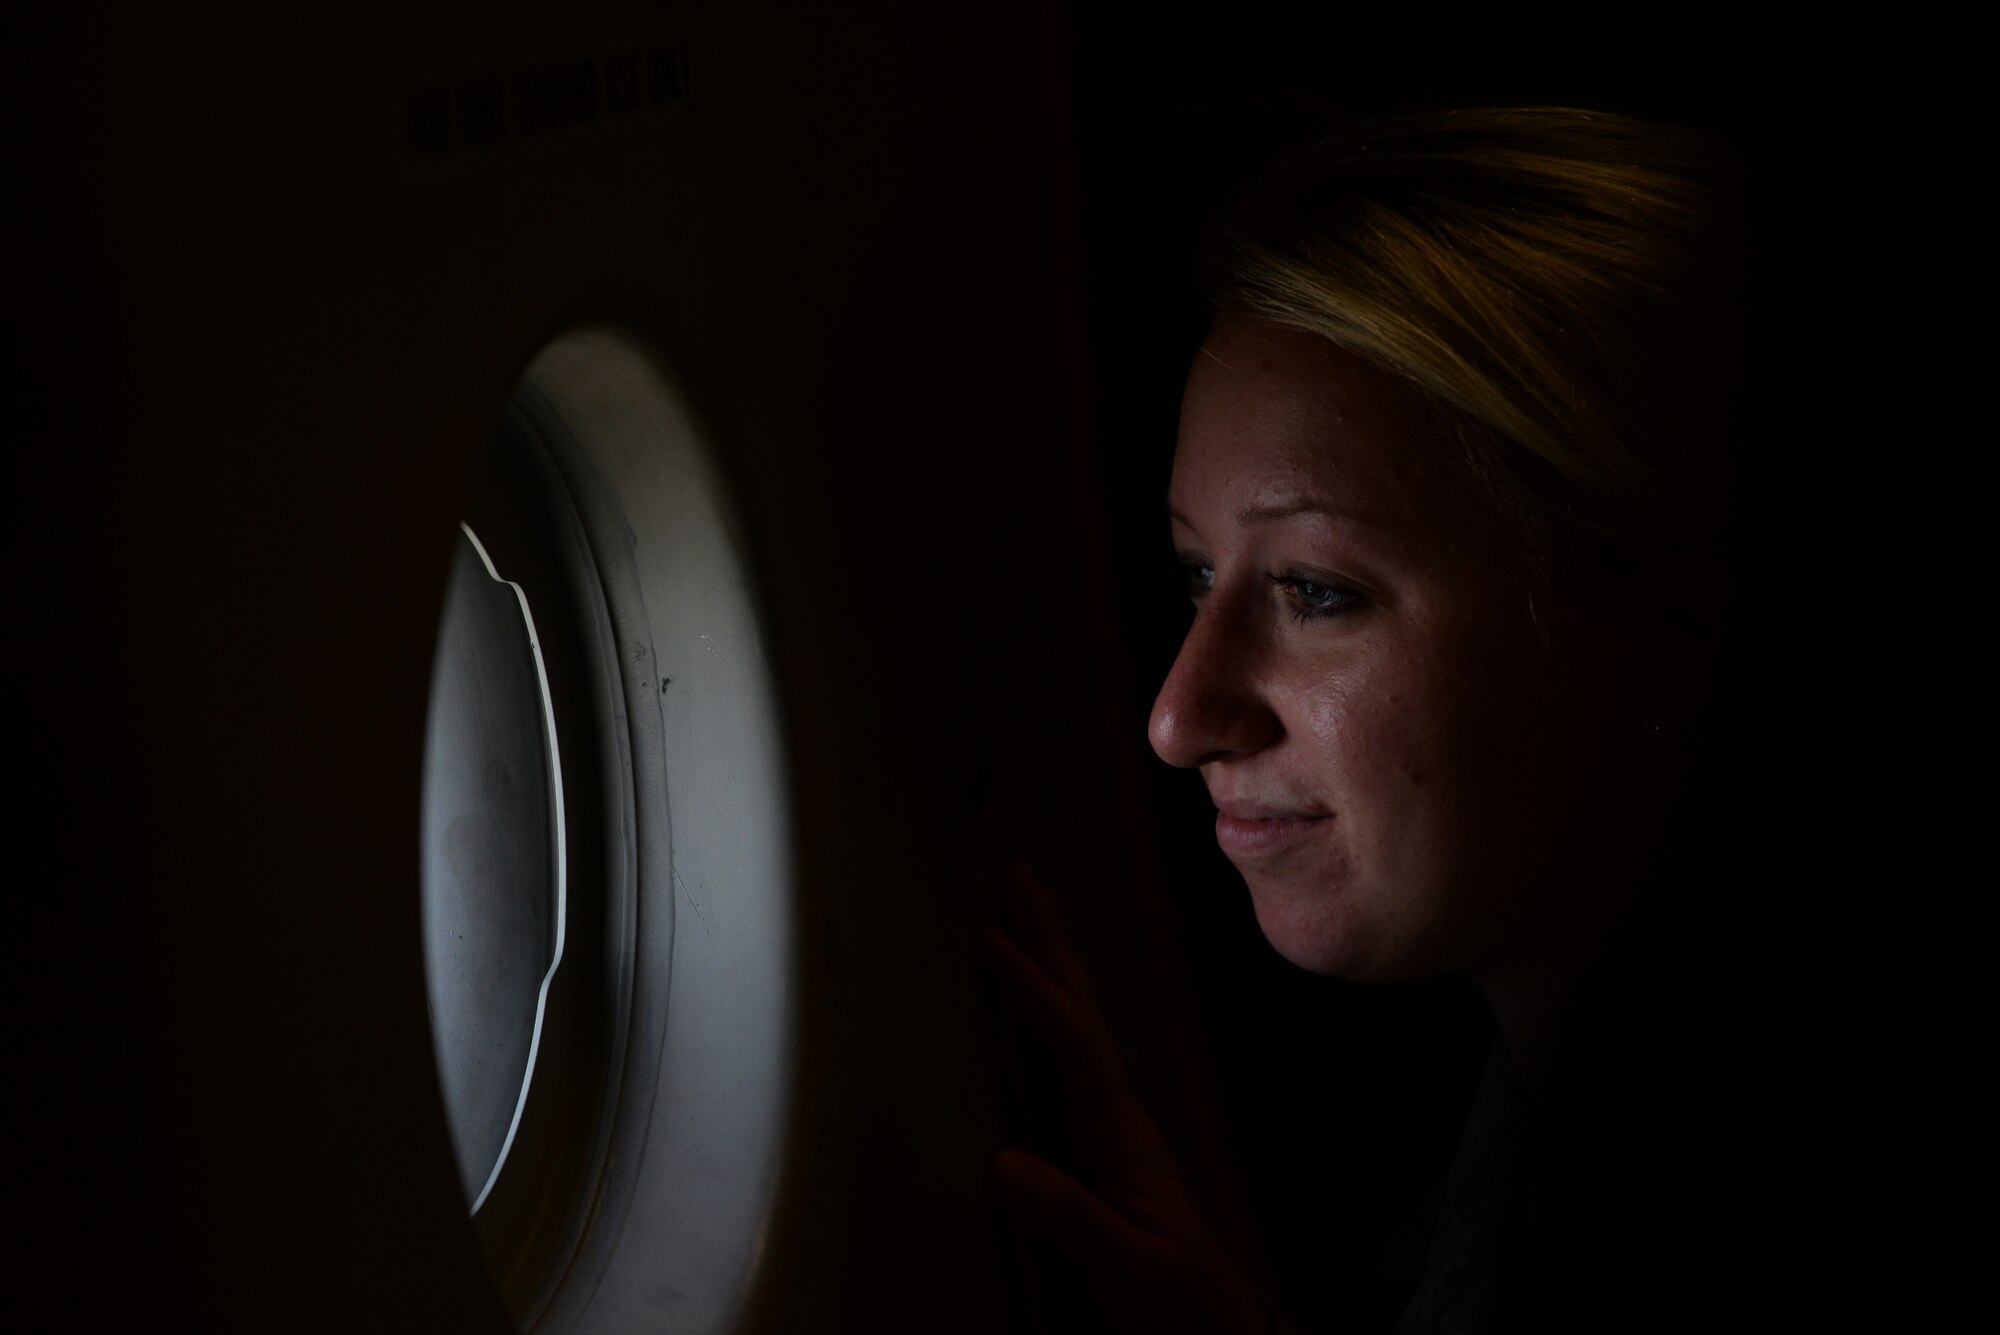 Senior Airman Jessica Jarosz, 81st Dental Squadron dental assistant, looks out a window on a C-17 Globemaster III during an incentive flight Aug. 4, 2016, at Keesler Air Force Base, Miss. The incentive flight was part of a weeklong hurricane exercise to prepare Keesler for the current hurricane season. (Air Force Photo by Airman 1st Class Travis Beihl/Released)